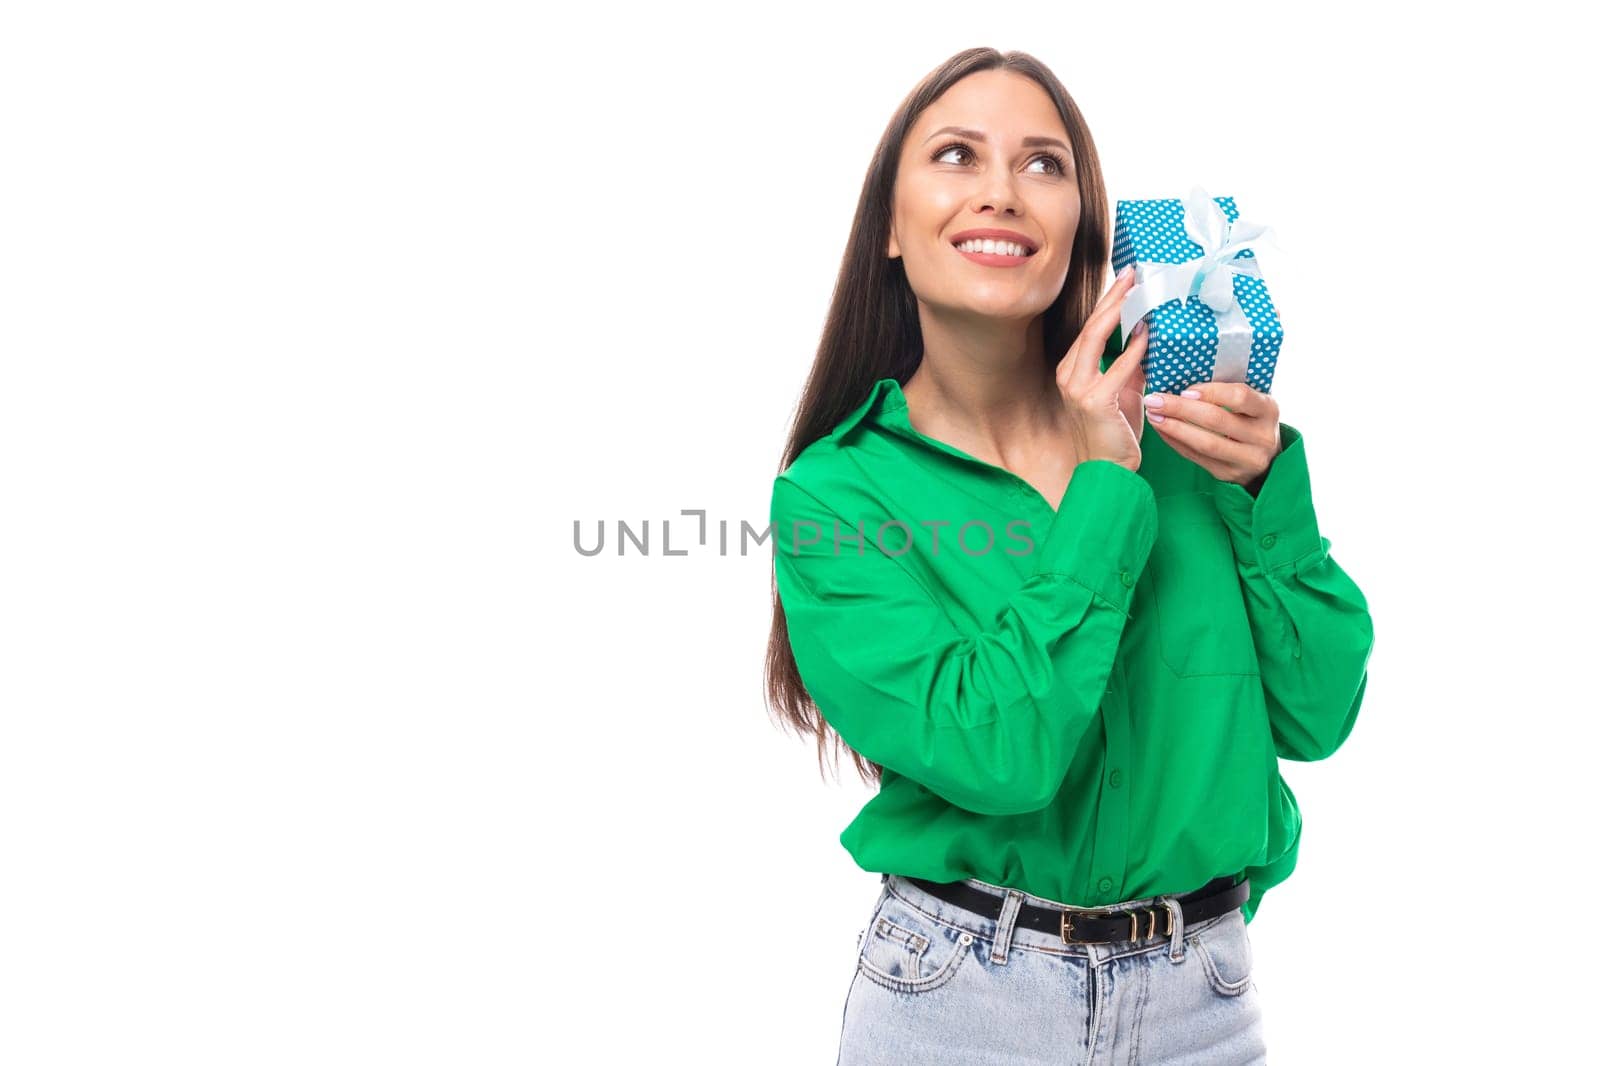 brown-eyed brunette young business lady in a green shirt holds a gift for the holiday.